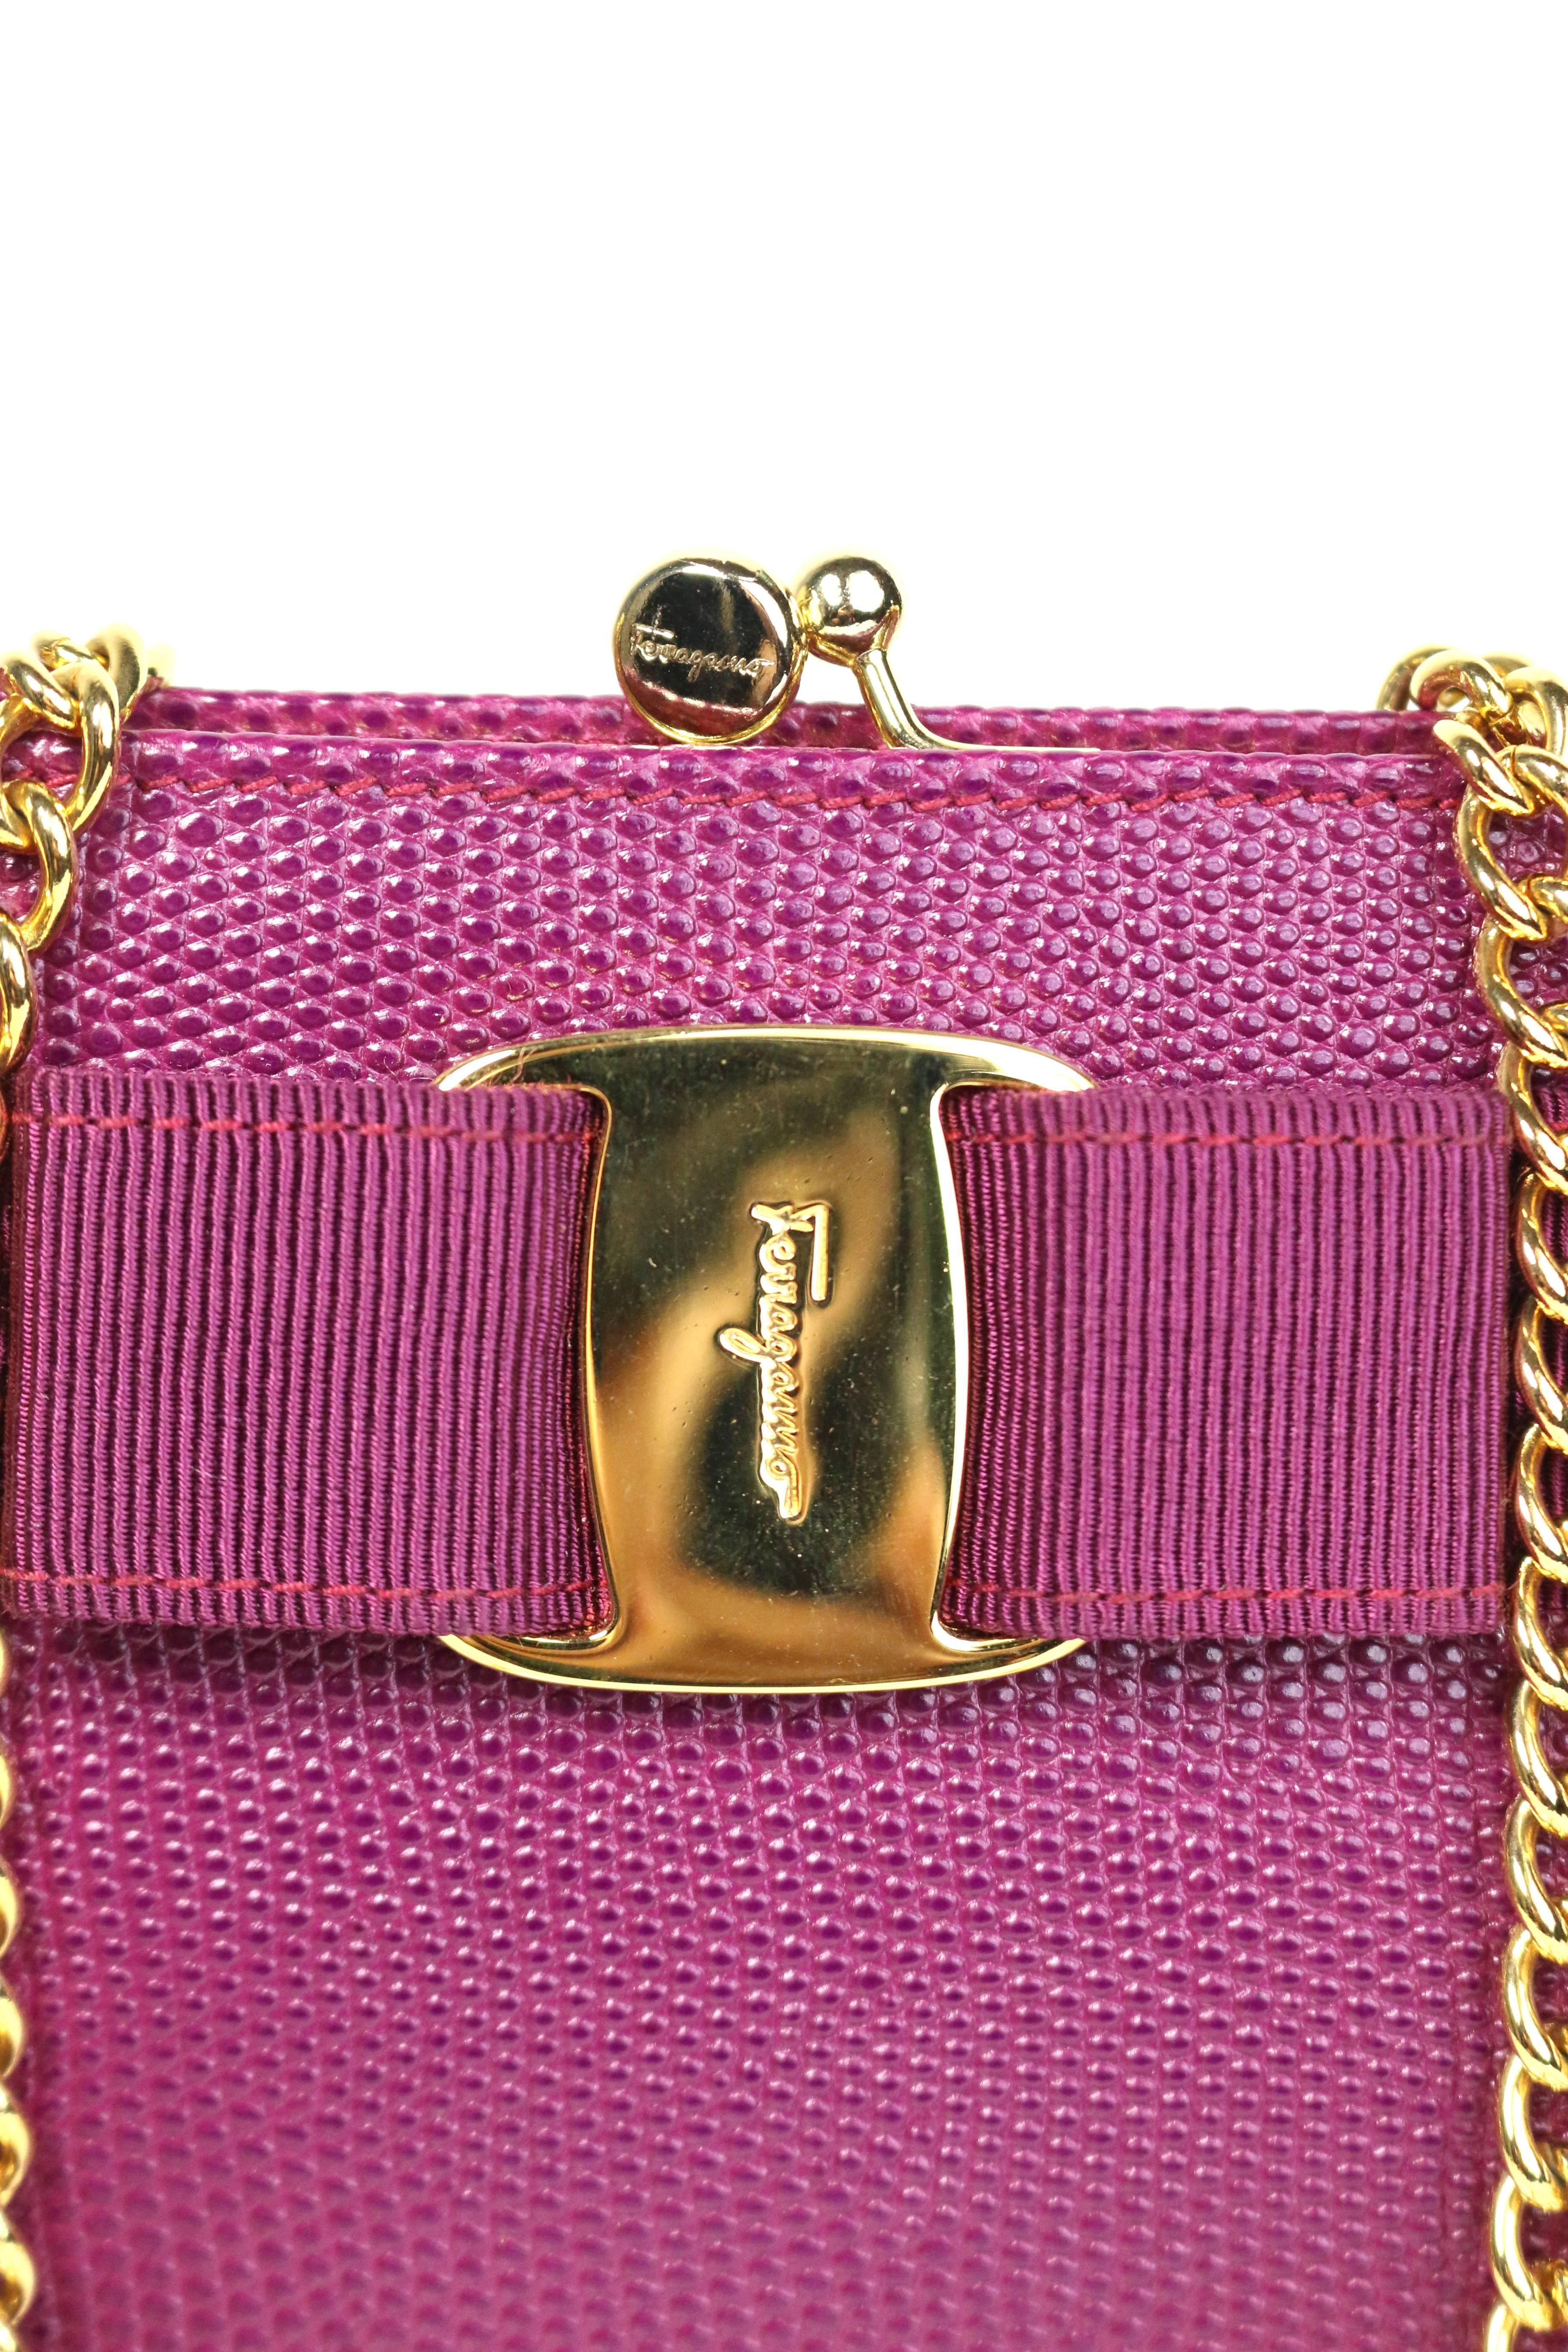 - Vintage 90s Salvatore Ferragamo purple lizard skin gold chain shoulder bag. Featuring a kiss lock closure with a detachable gold toned hardware shoulder chain. Its one of a kind! 

- Made in Italy. 

- Size: Length: 6.25 inches. Height: 5 inches.